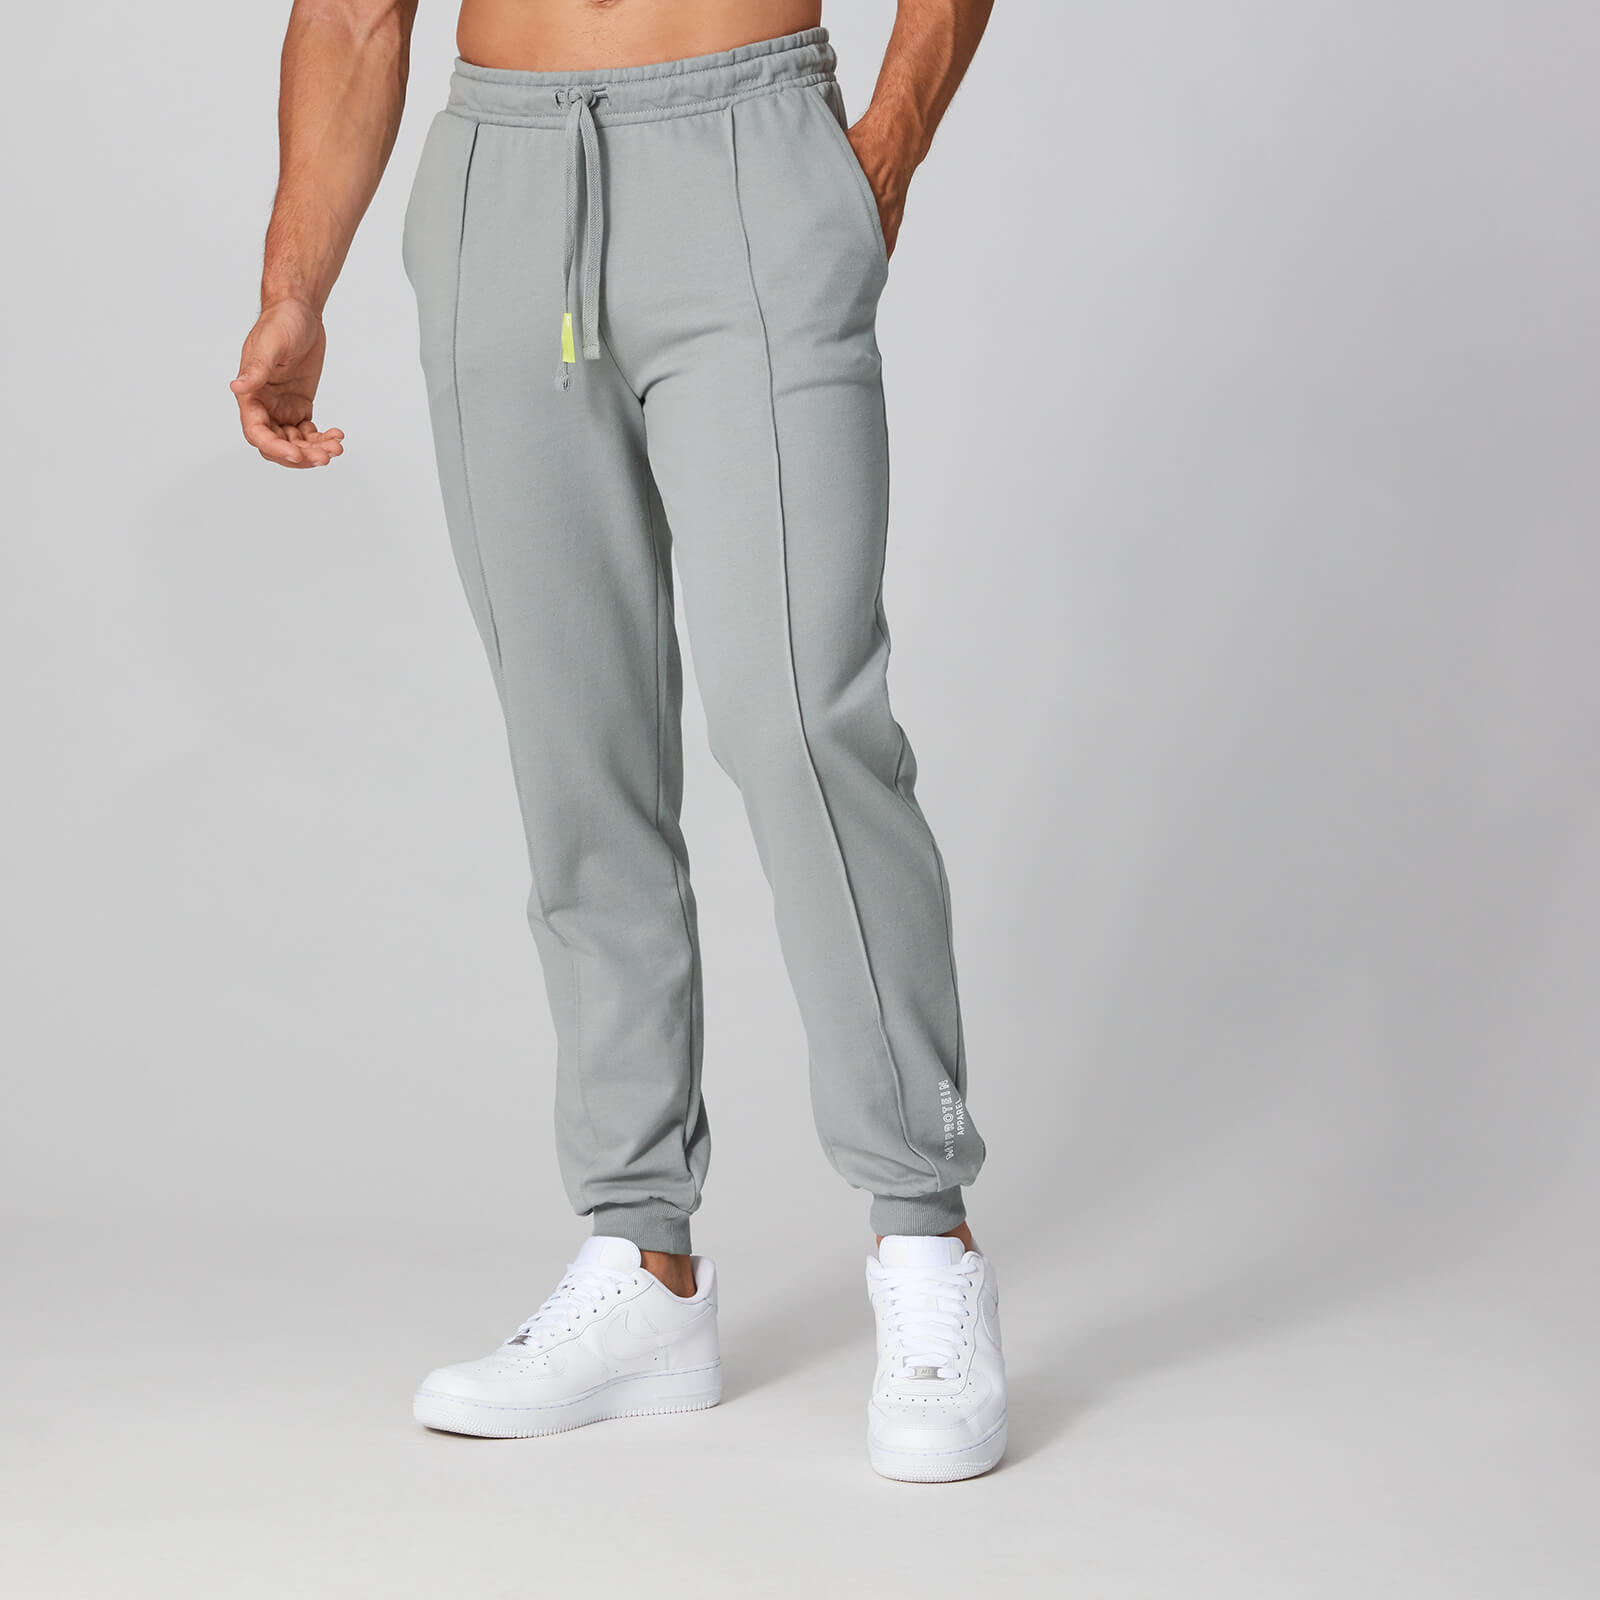 Myprotein Signature Joggers - Alloy